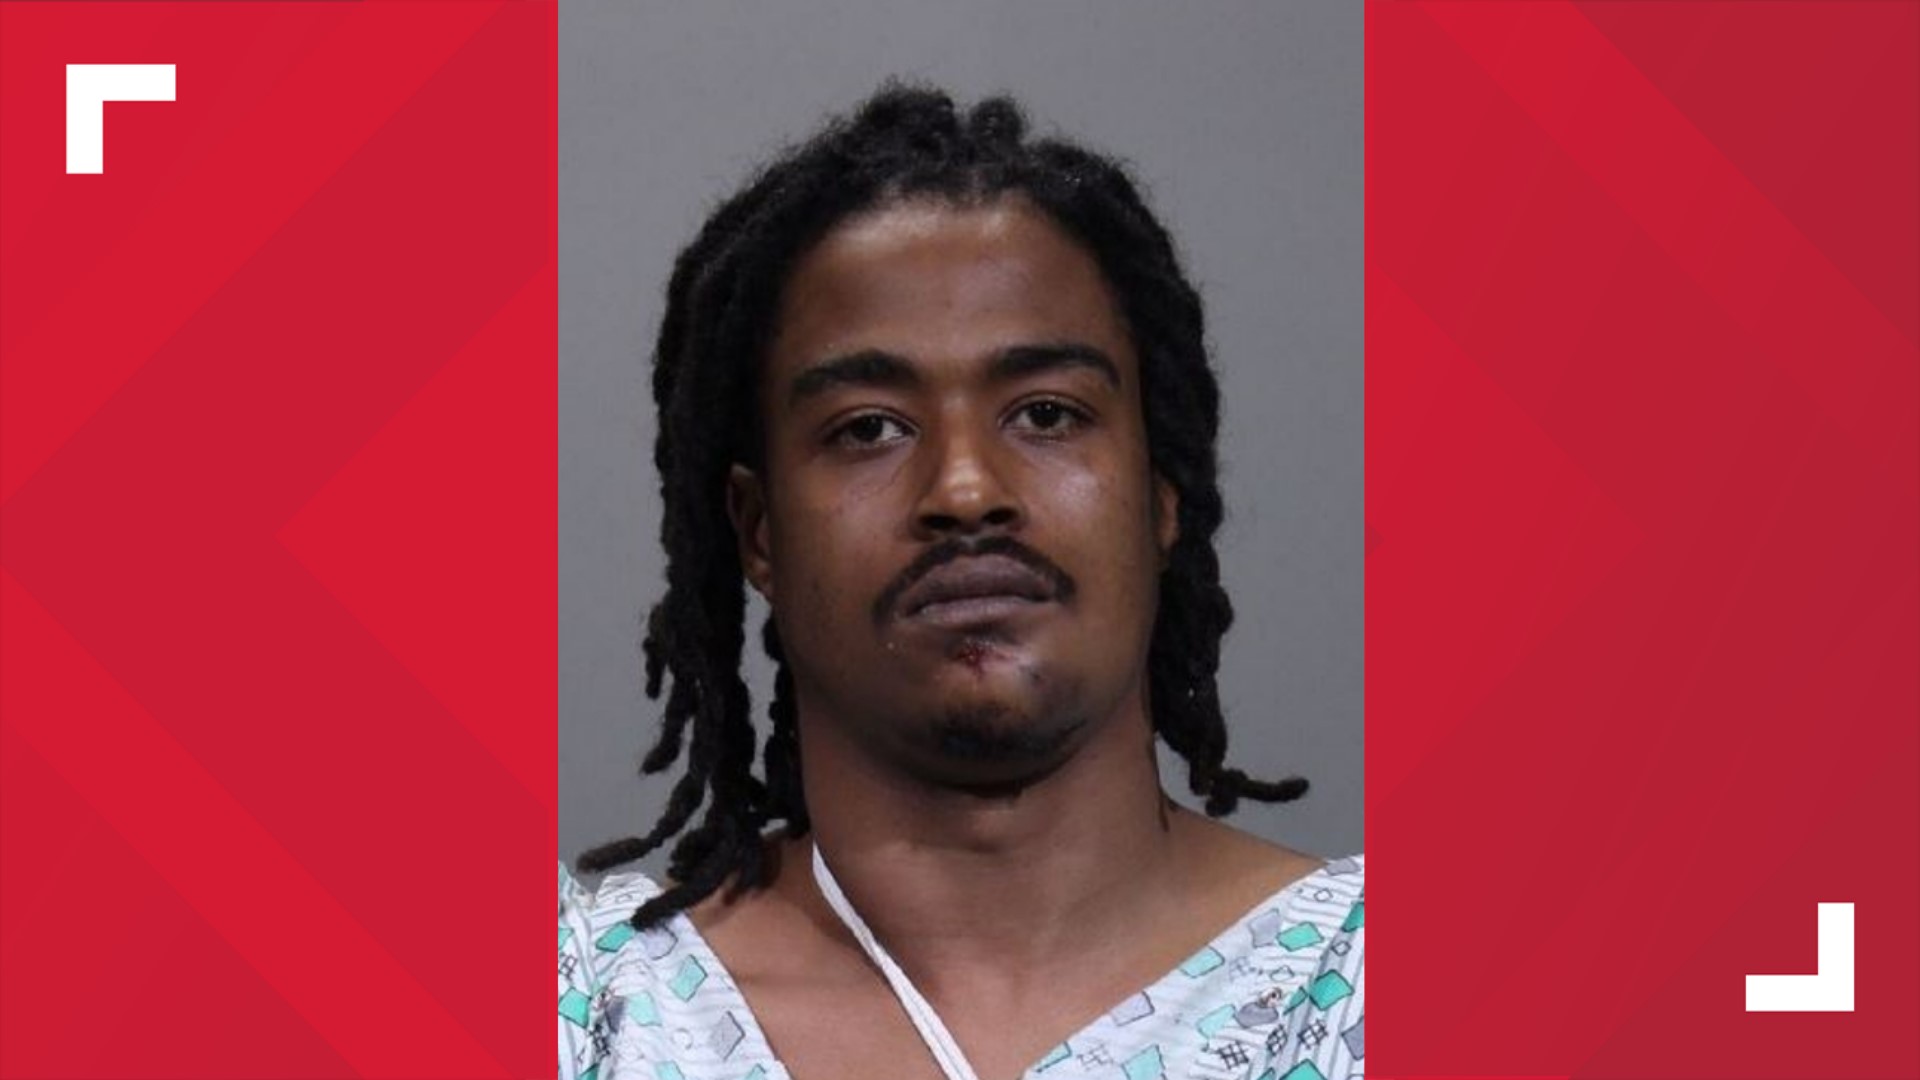 Police are looking for Paul Harris III who is charged with the murder of Trey Glover, 32, in a shooting that happened last May.